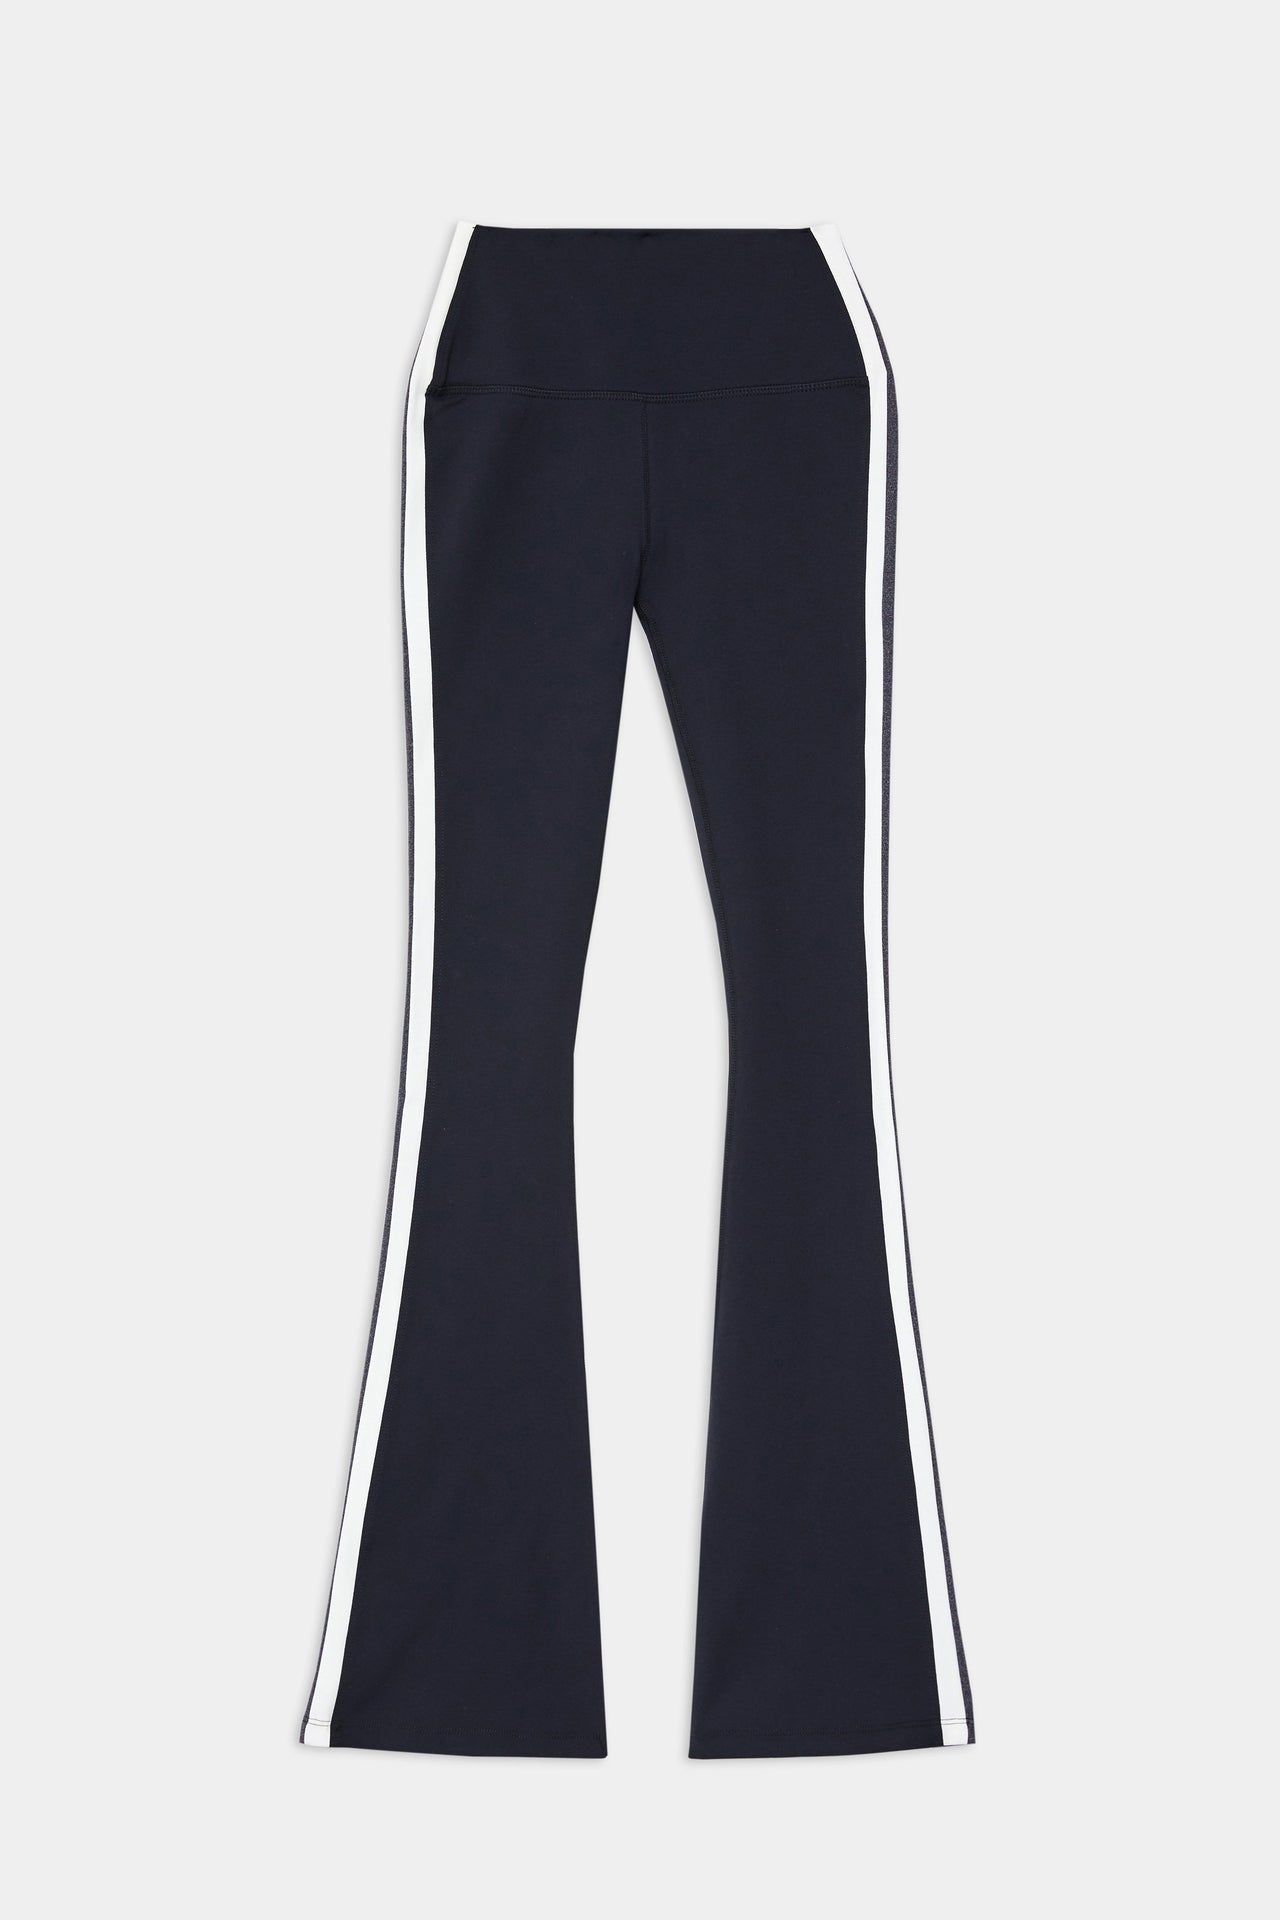 Front flat view of black high waist below ankle length legging with wide flared bottoms with white and dark gray side stripes on both legs